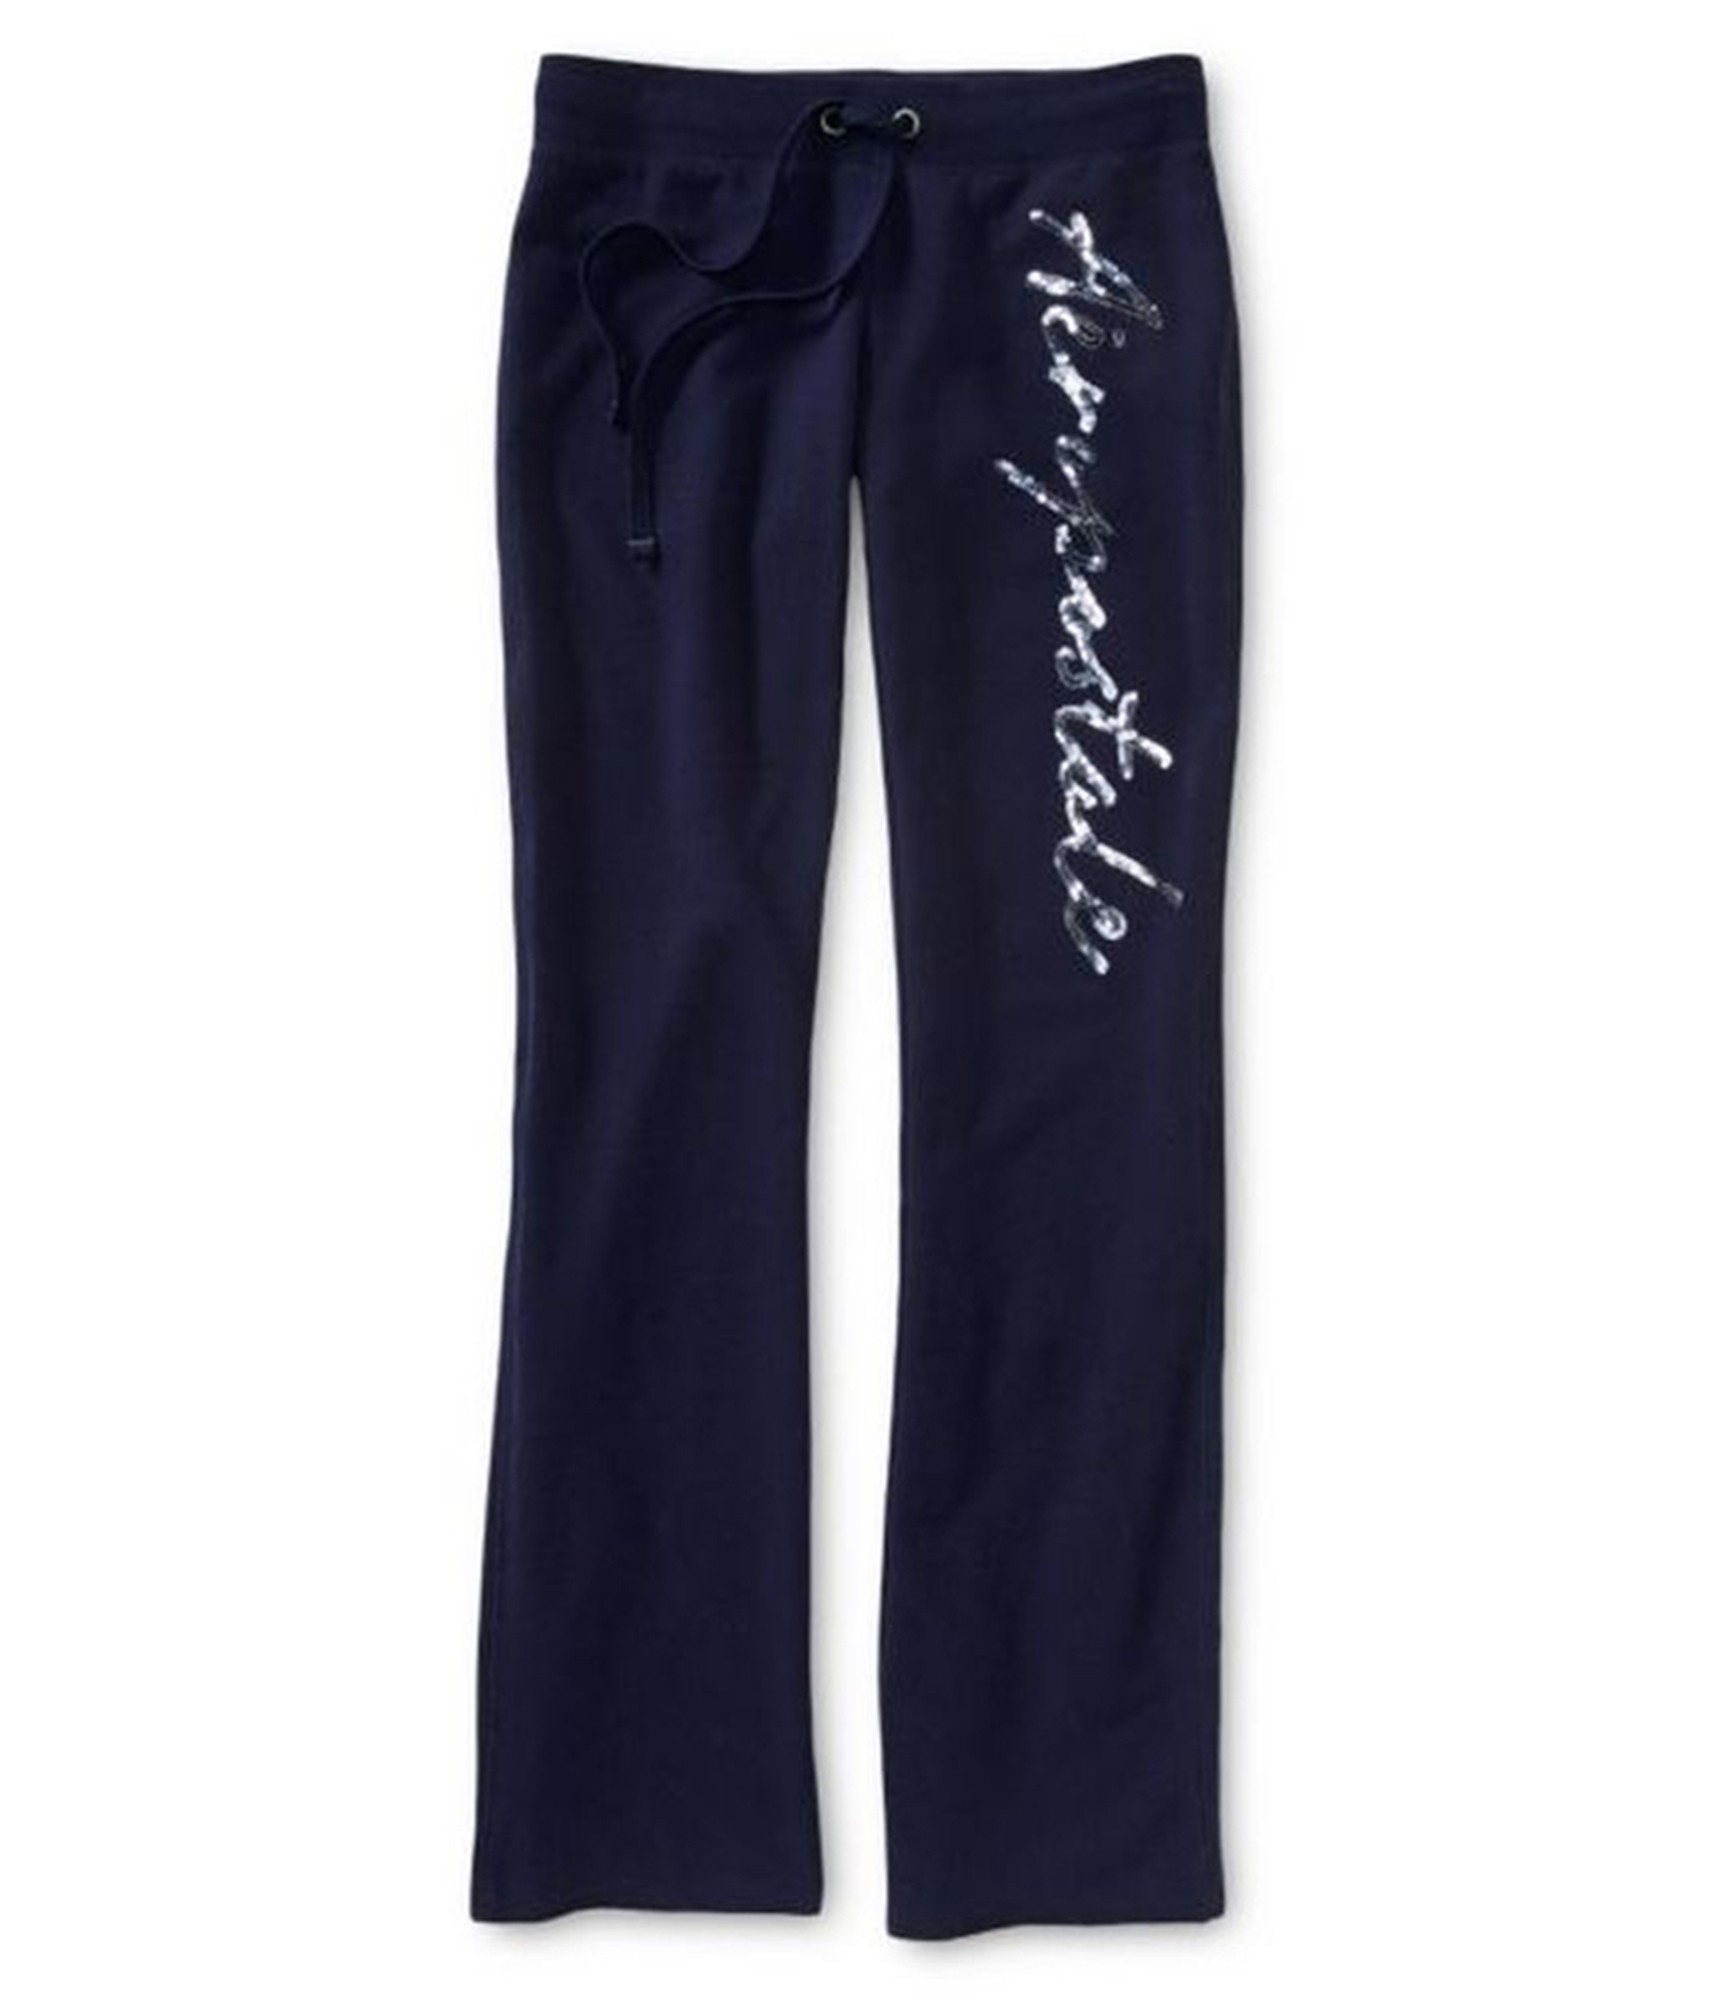 Aeropostale Womens Fit and Flare Sweatpants